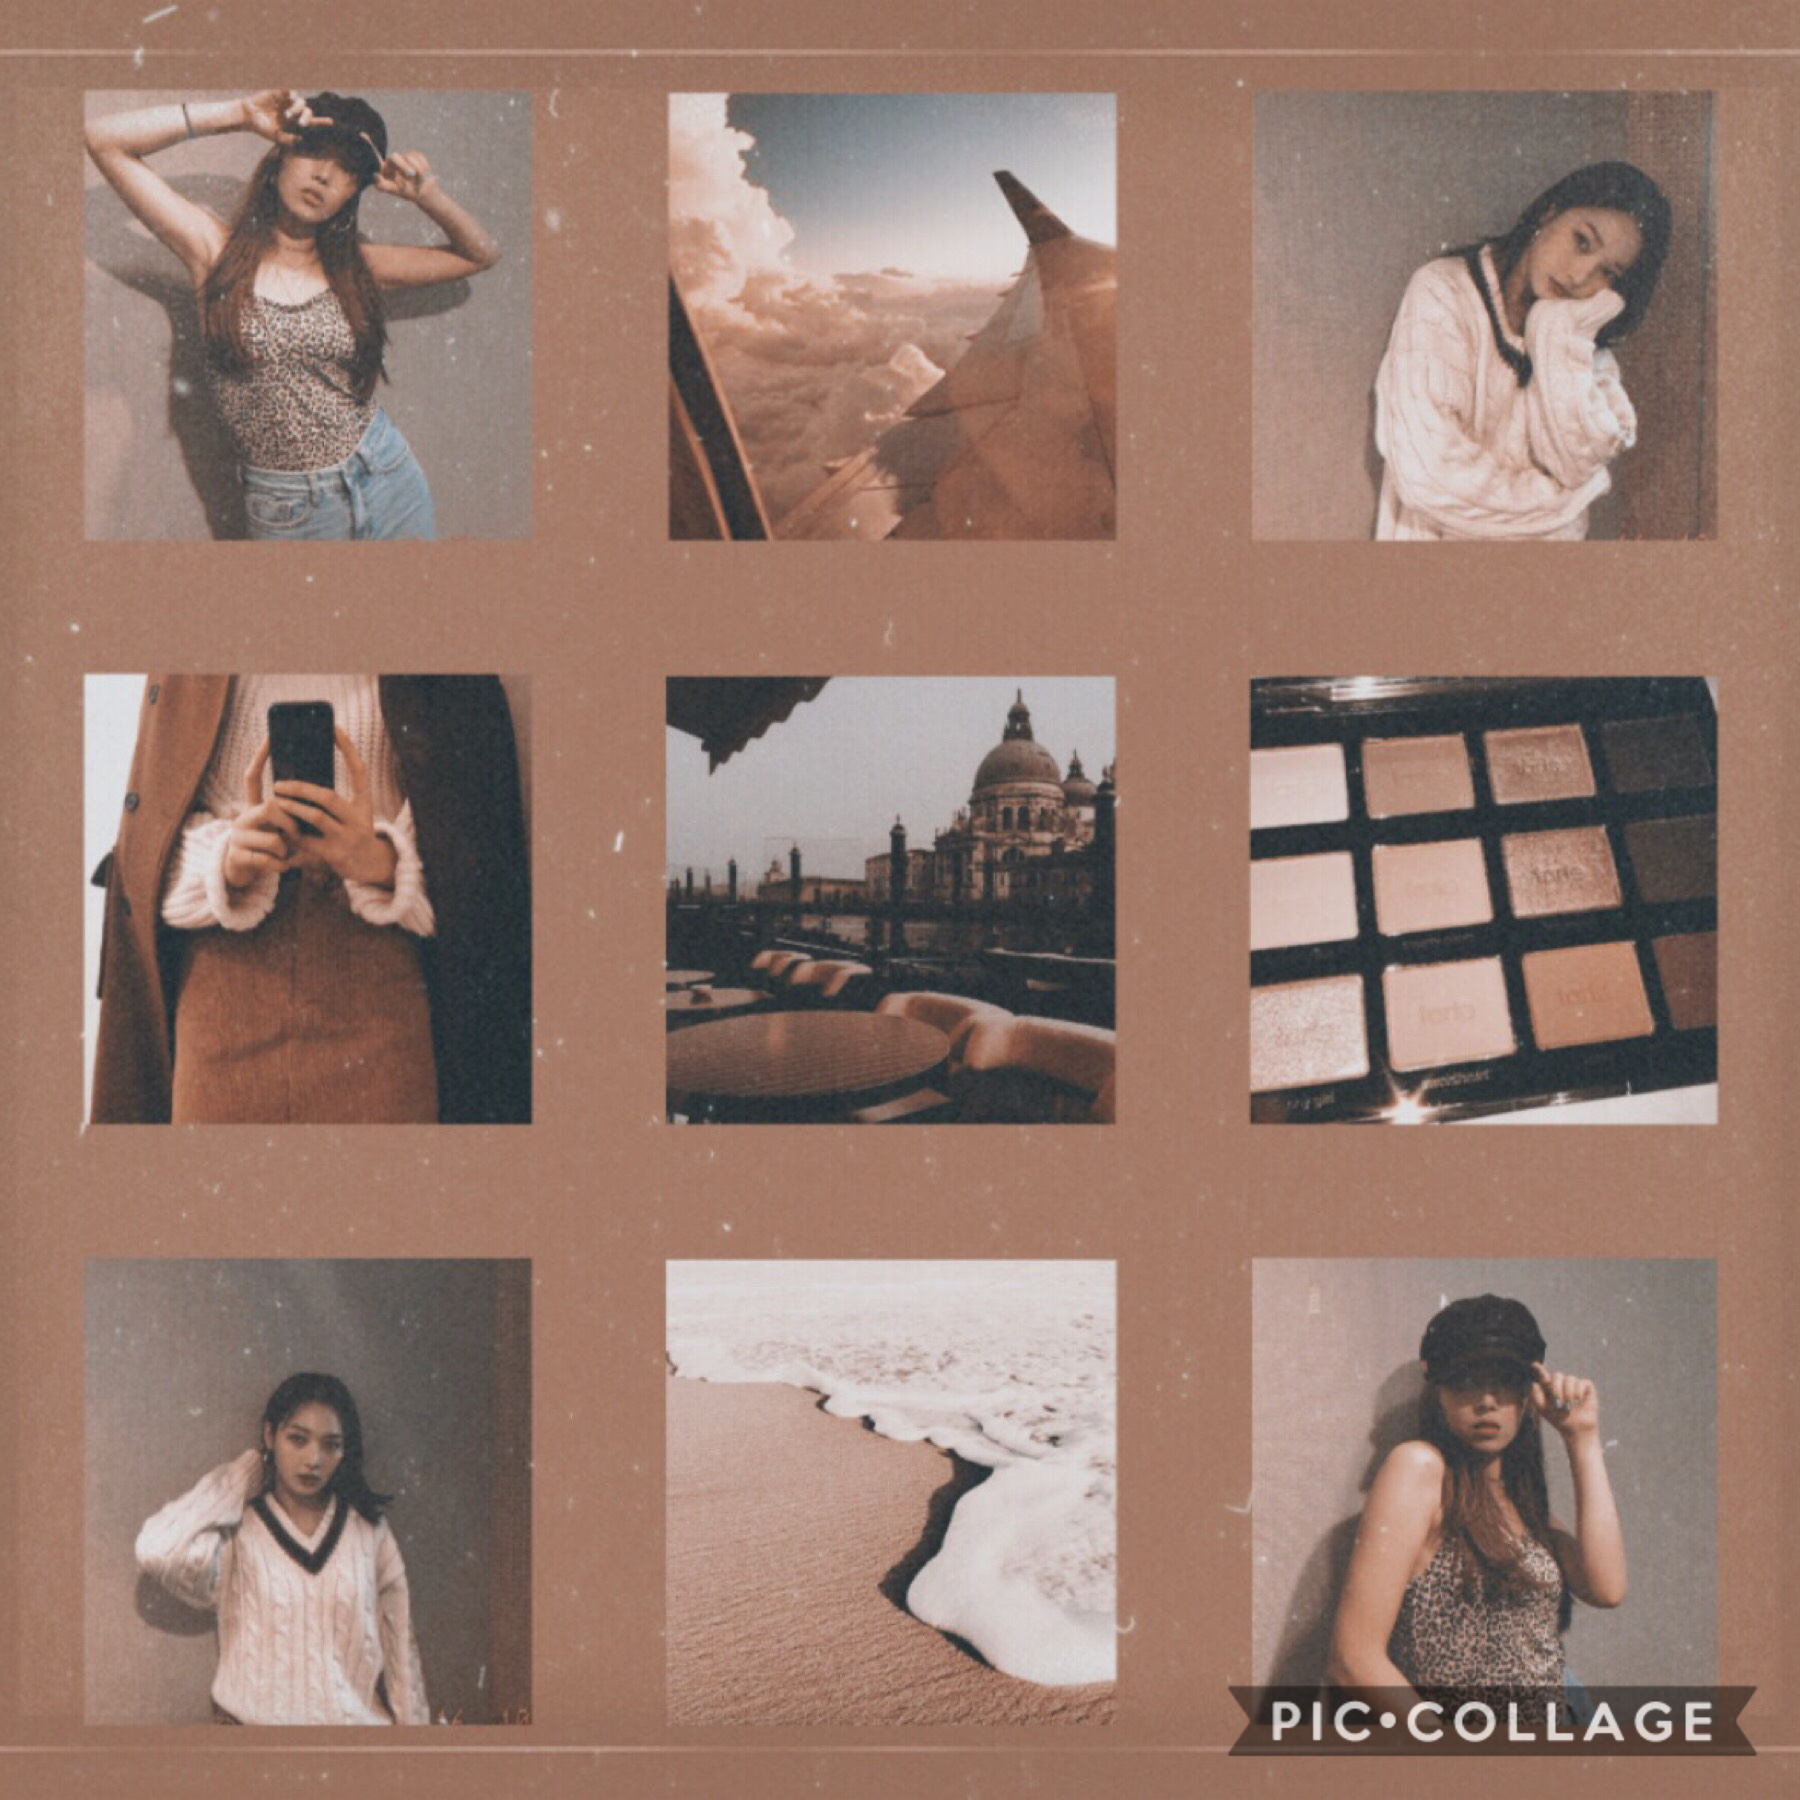         🍂
╰☆☆ ʏᴏᴜ ᴀʀᴇ ᴛʜᴇ ʜᴏᴛ ᴛᴏ ᴍʏ ᴄʜᴏᴄᴏʟᴀᴛᴇ ☆☆╮
(this is so simple but i really like it for some reason. Anyways I’m going to be gone for a few days to 2 weeks. Ily guys so much and thank you for the love💗)